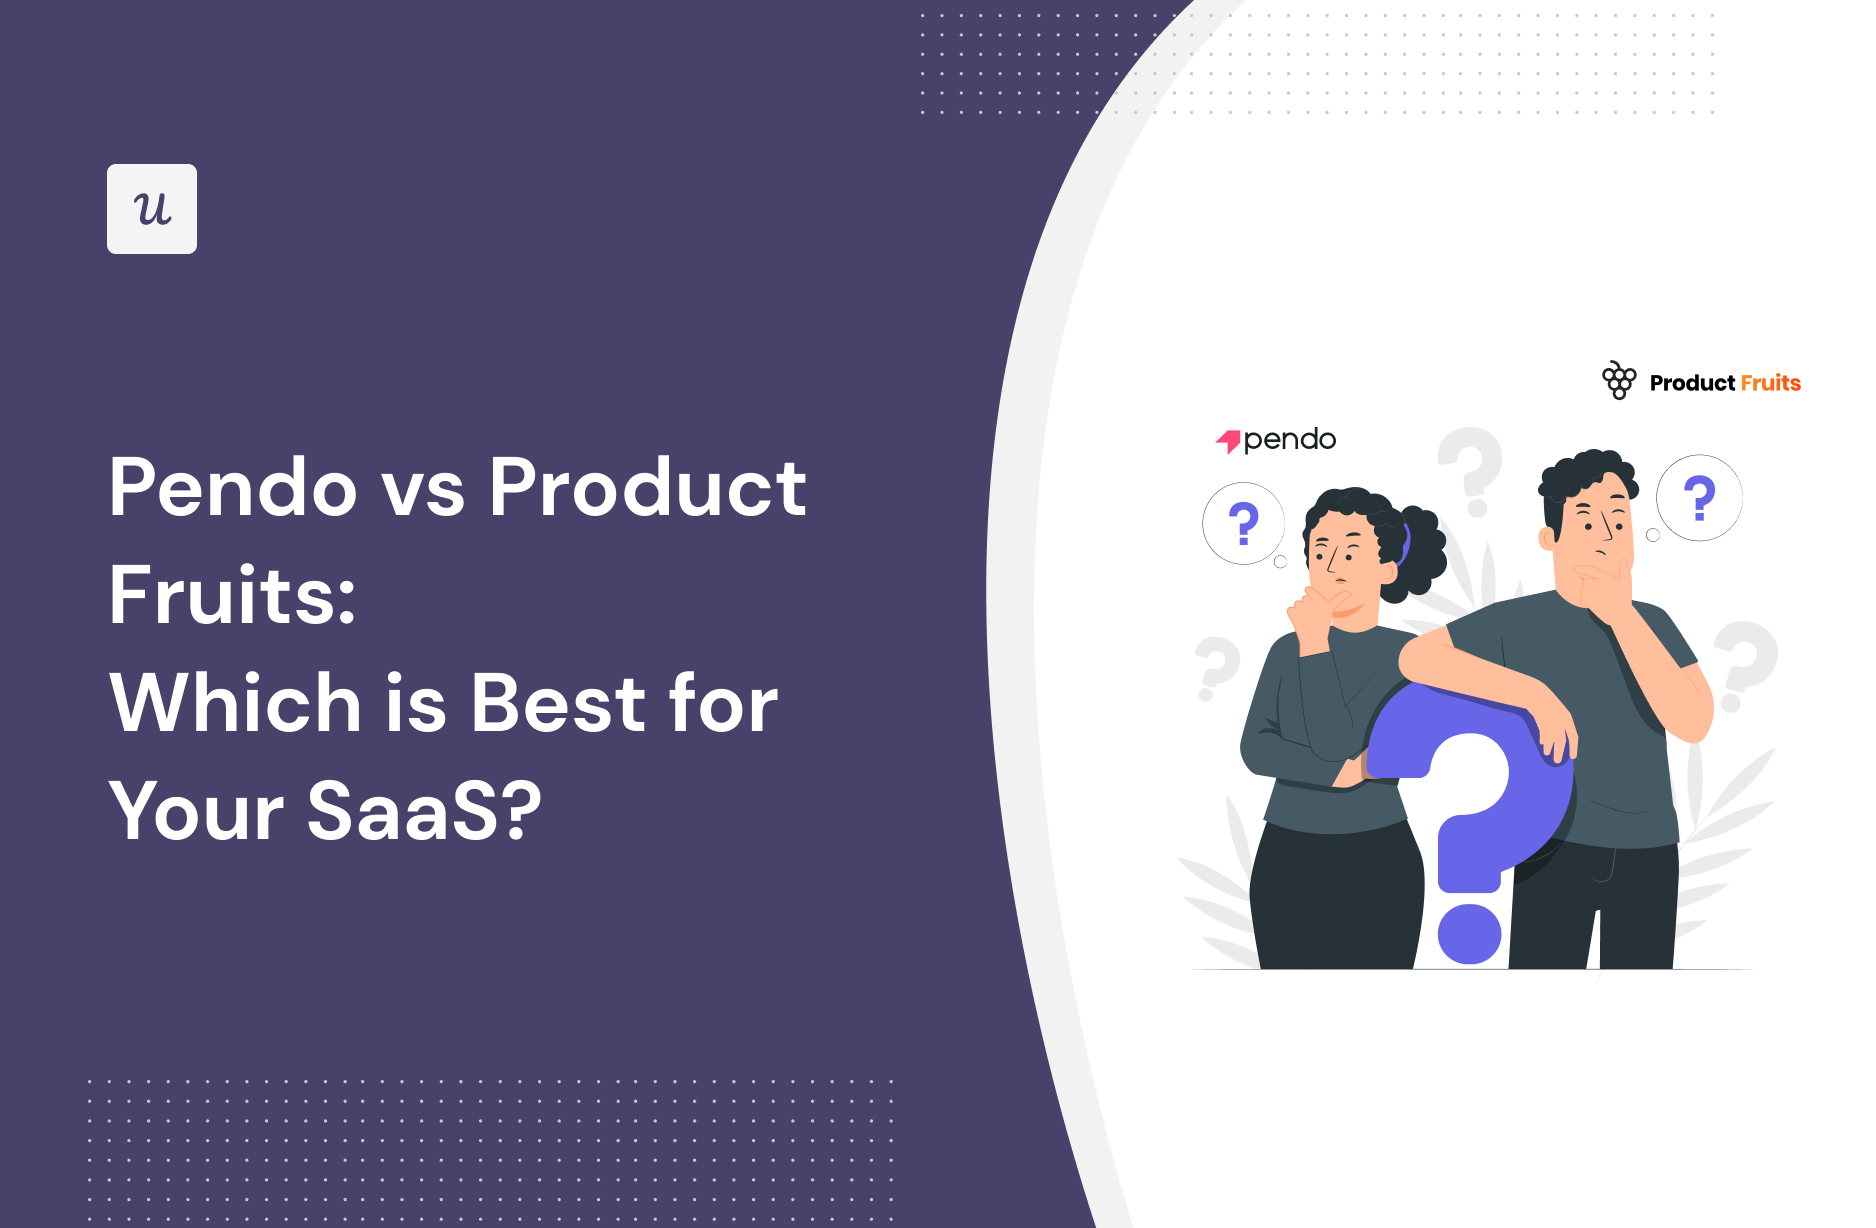 Pendo vs Product Fruits: Which is Best for Your SaaS?